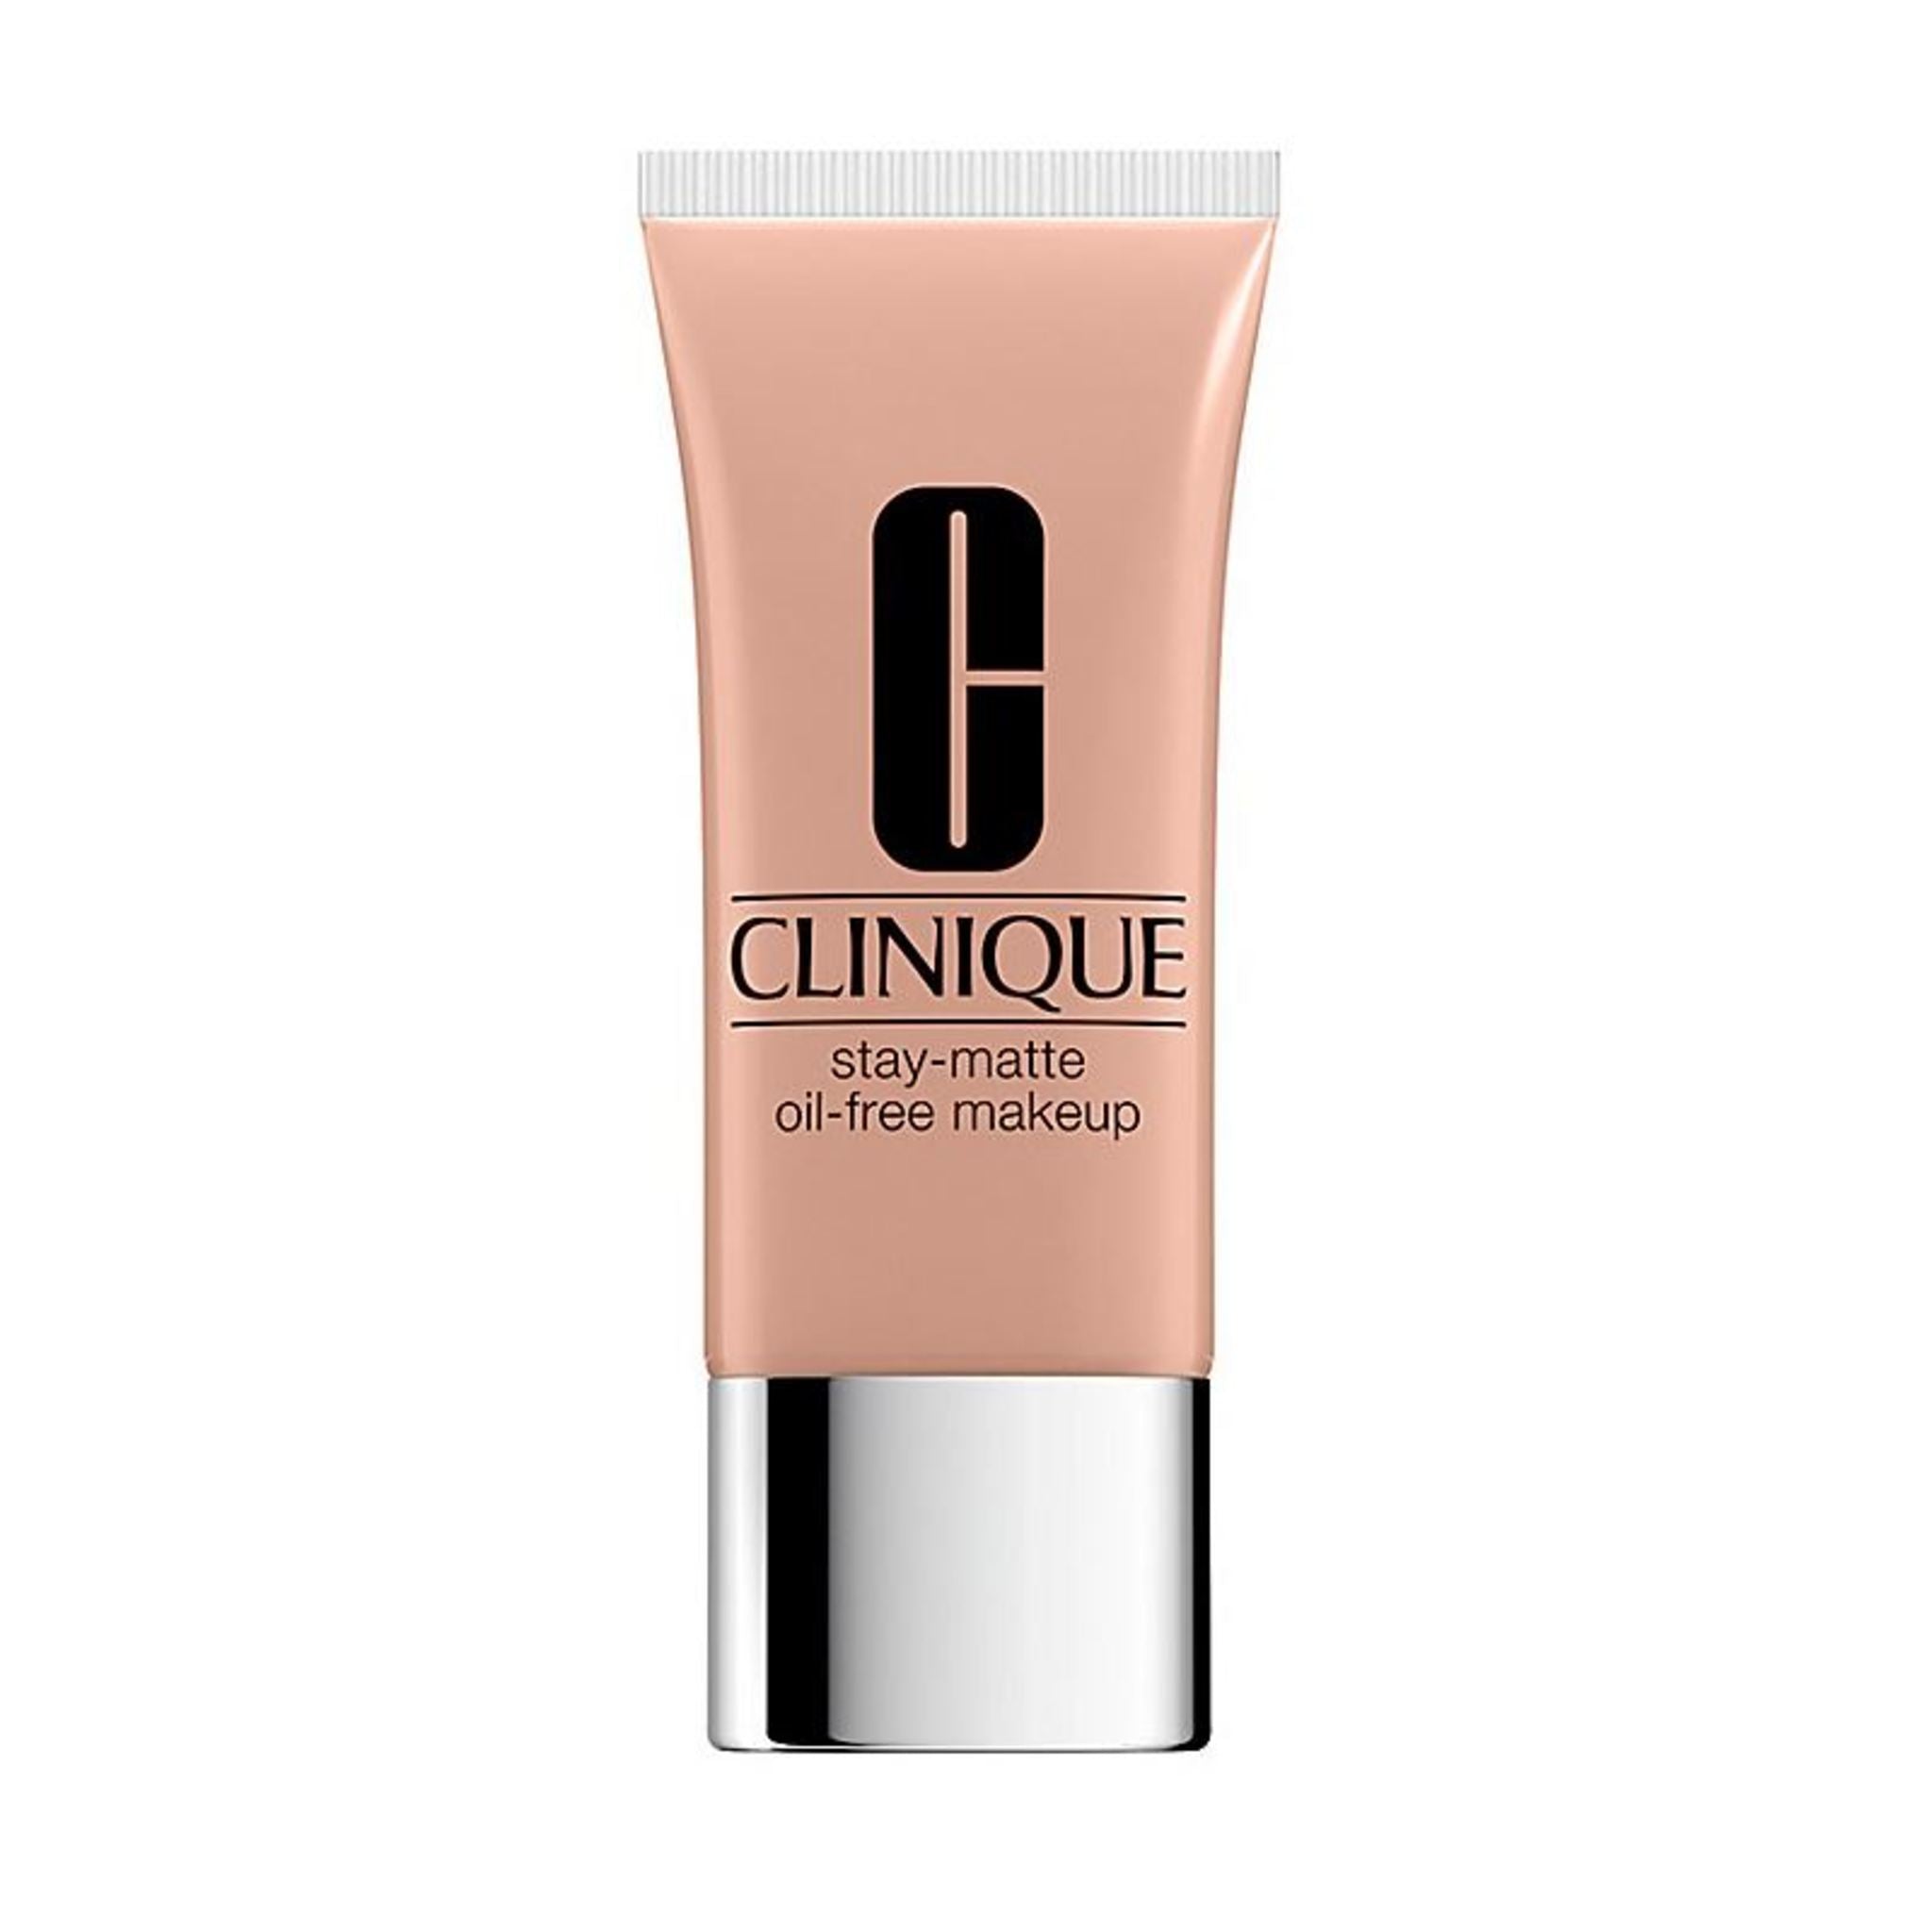 Clinique Stay Matte Oil Free Makeup Color/Shade variant: Linen main image. This product is for light cool neutral complexions